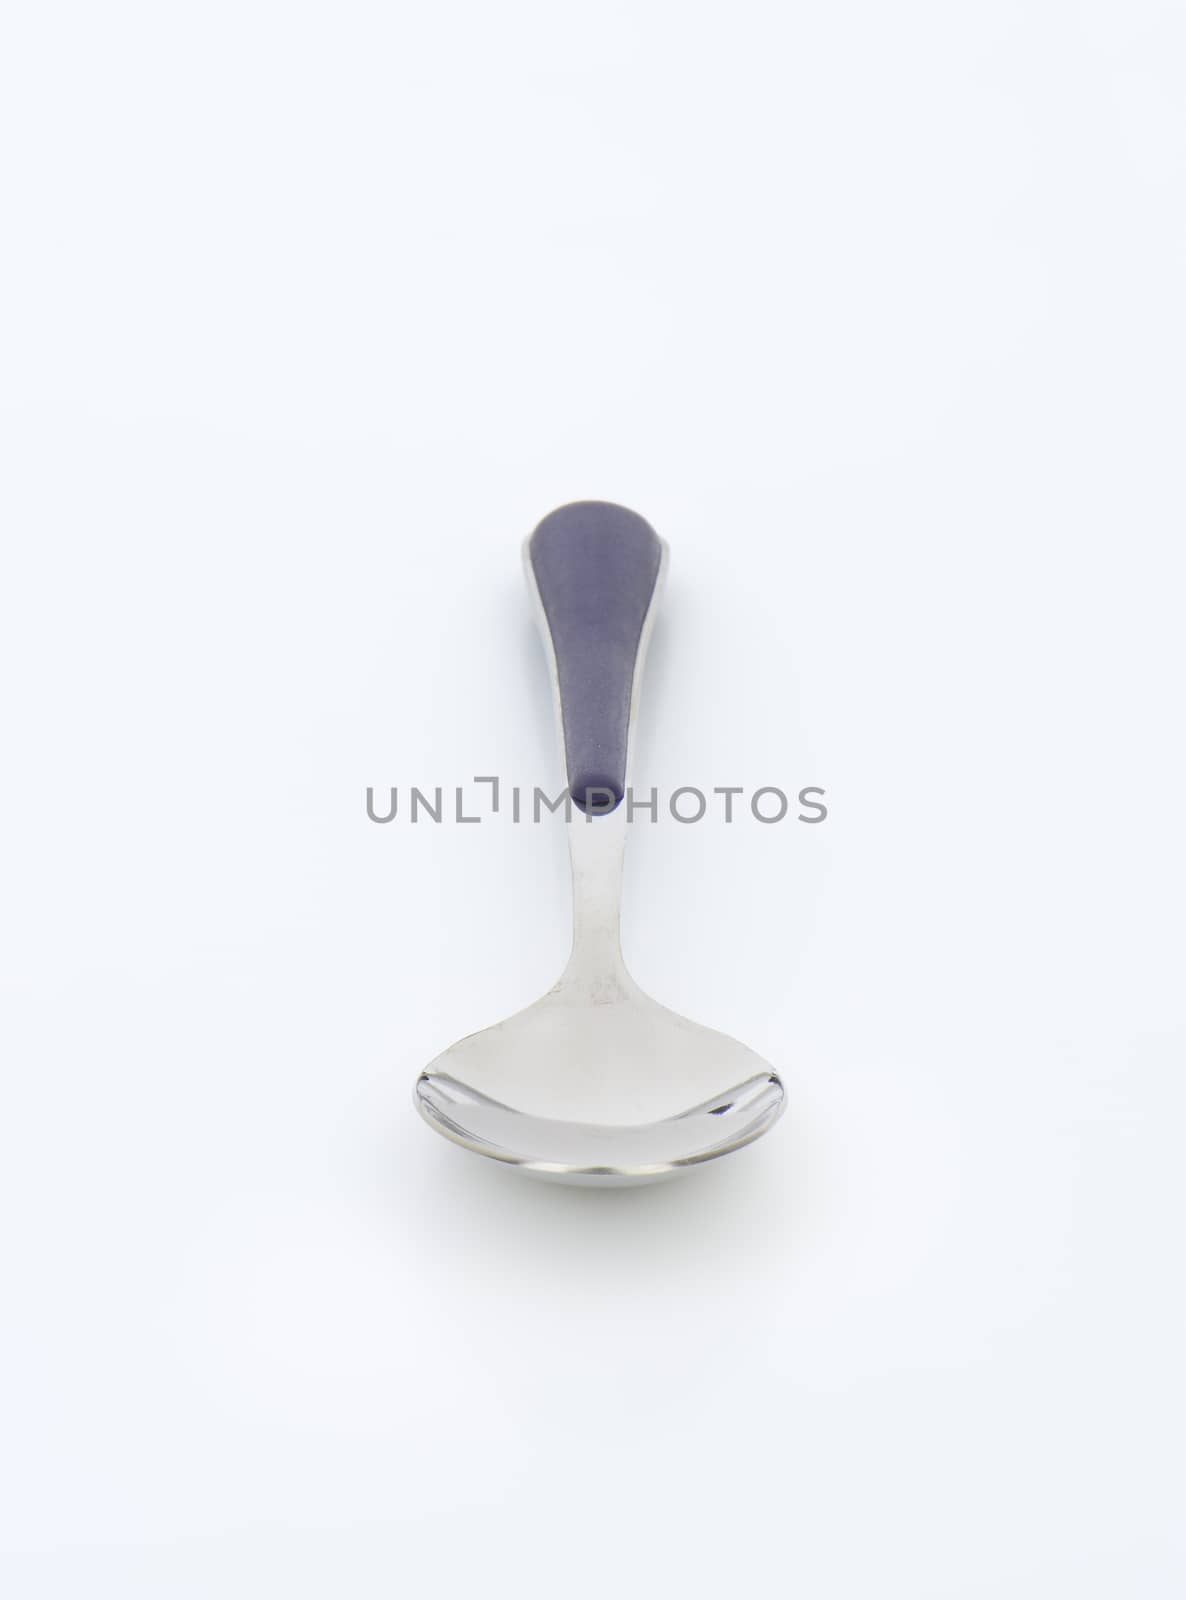 Small table spoon with blue handle